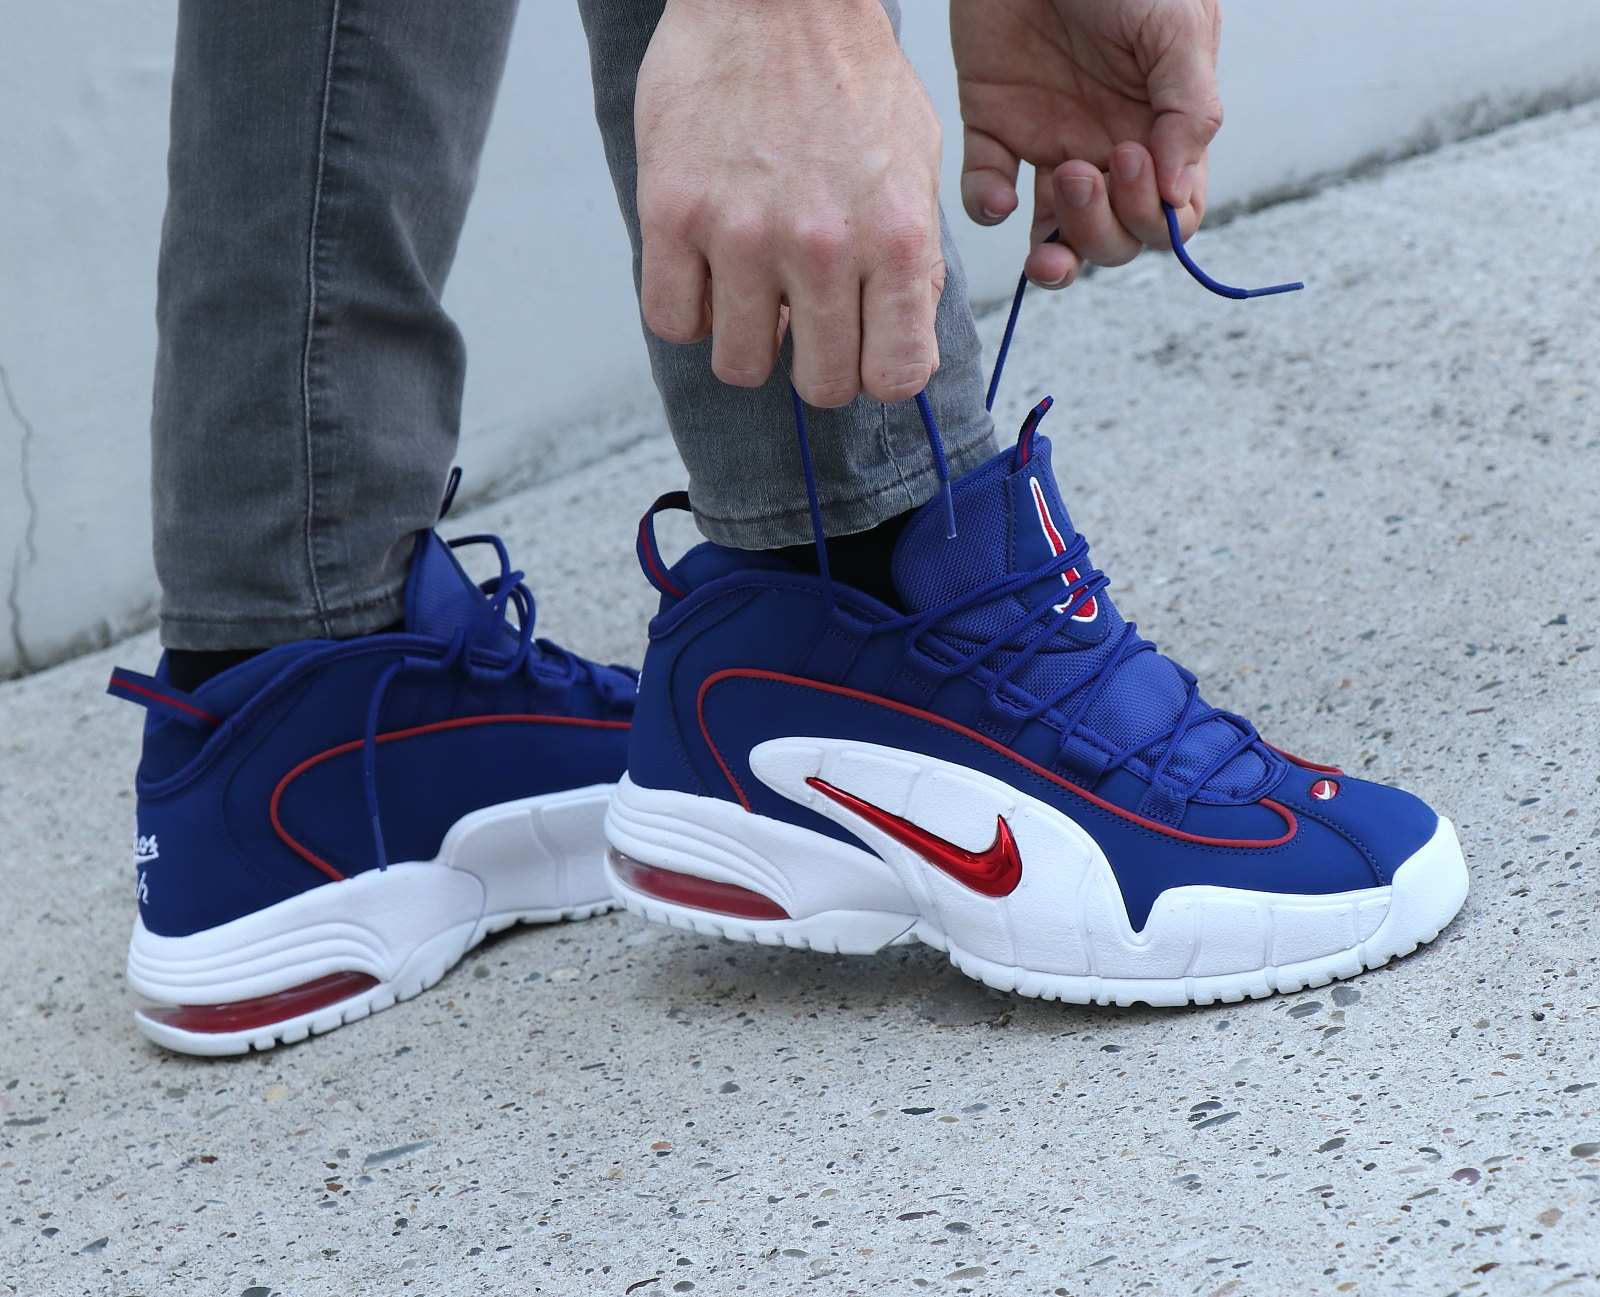 Nike Air Max Penny - Lil Penny